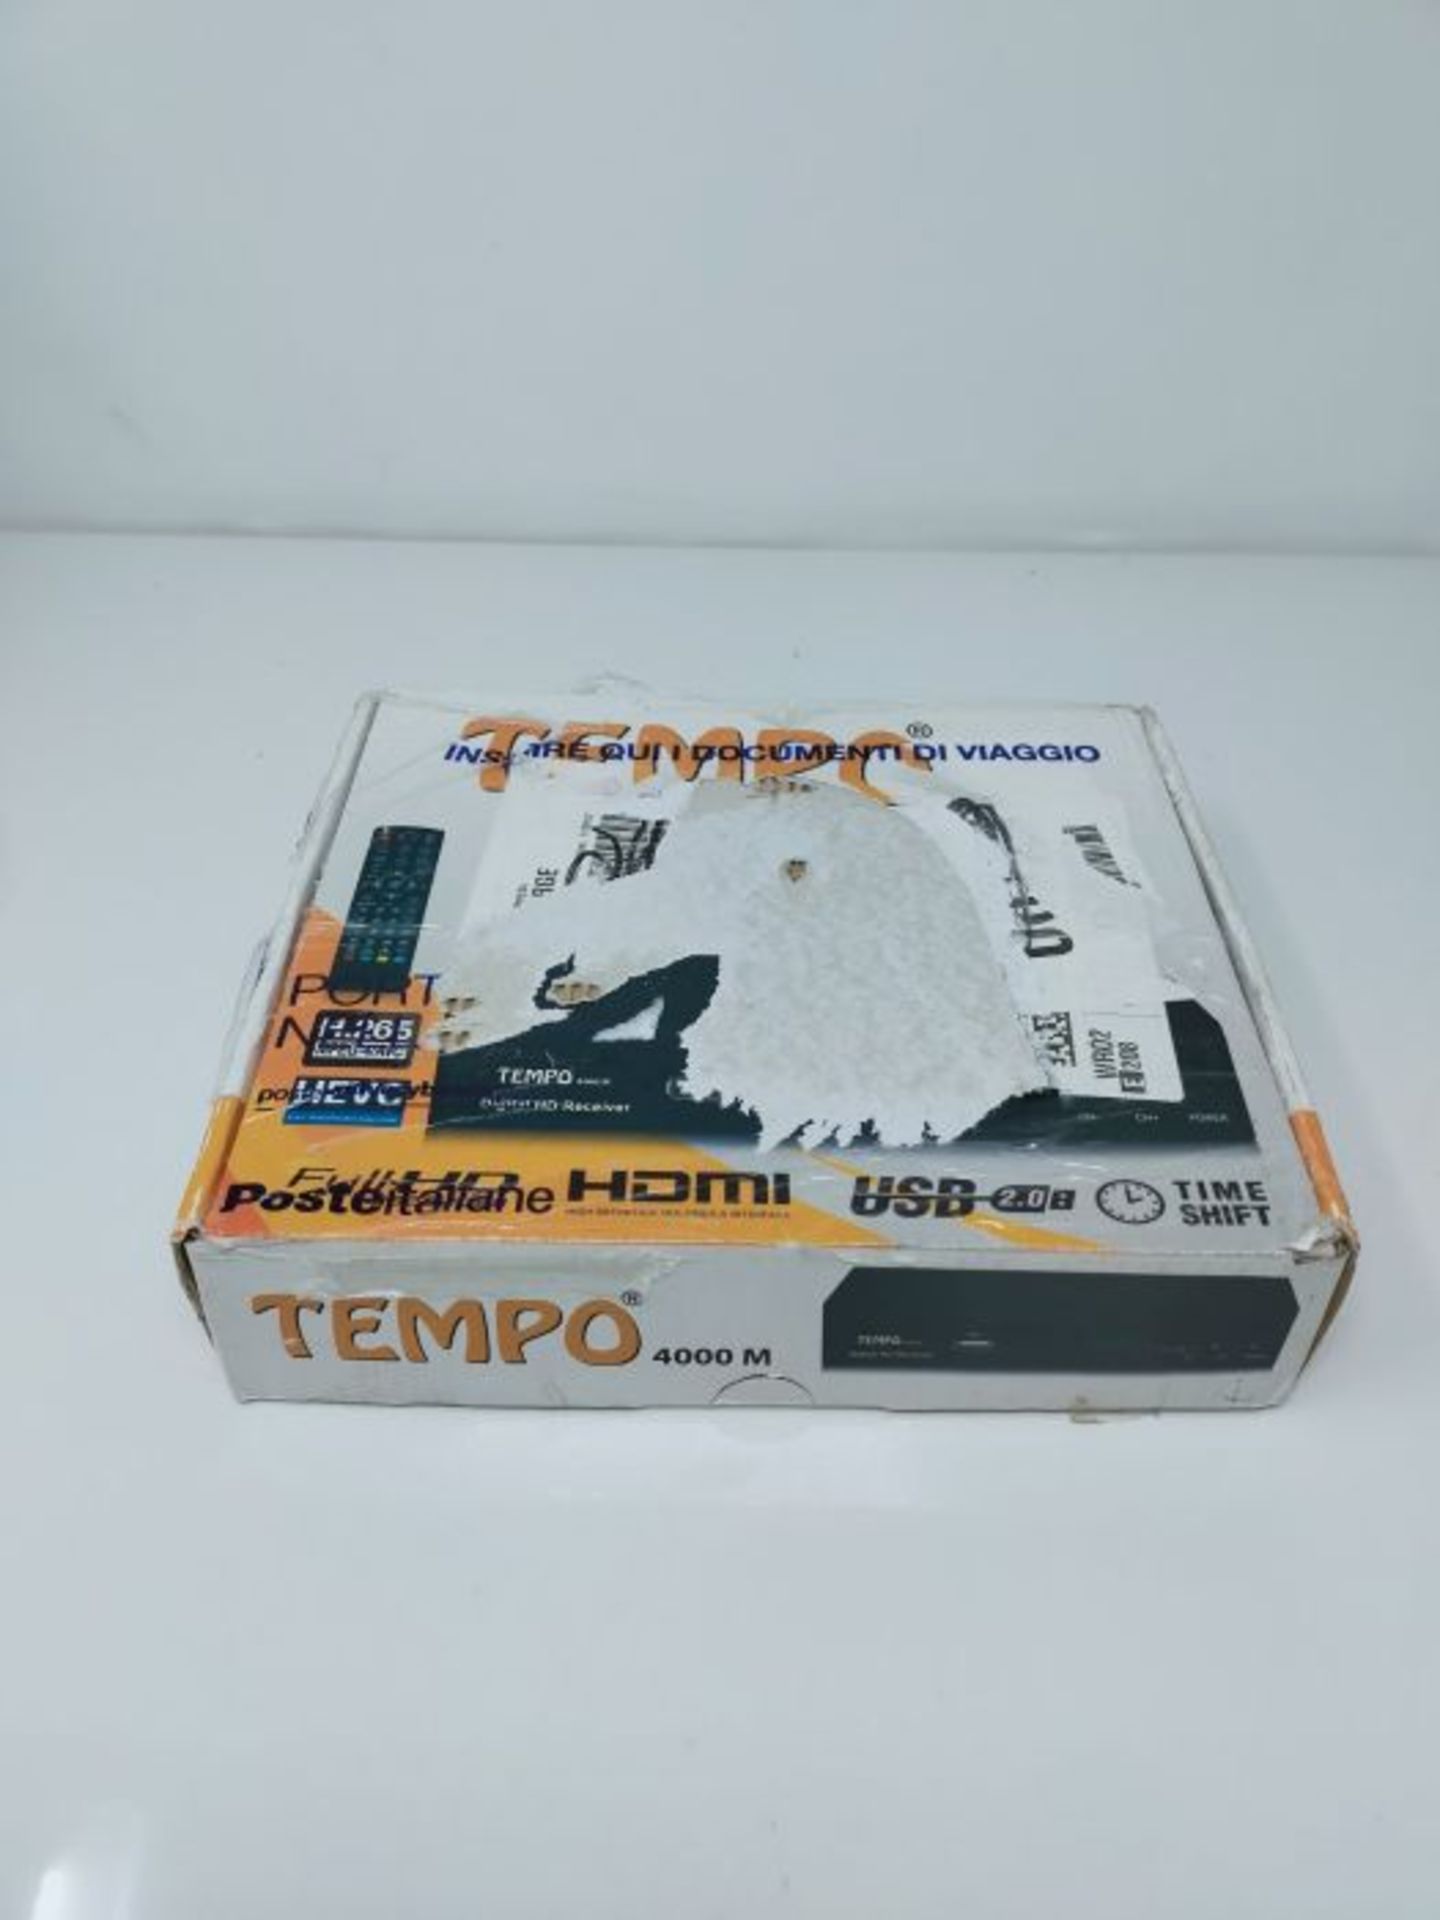 Tempo 4000 H.265 HEVC terrestrial receiver HD, DVB-T2, compatible for new channels, HD - Image 2 of 3